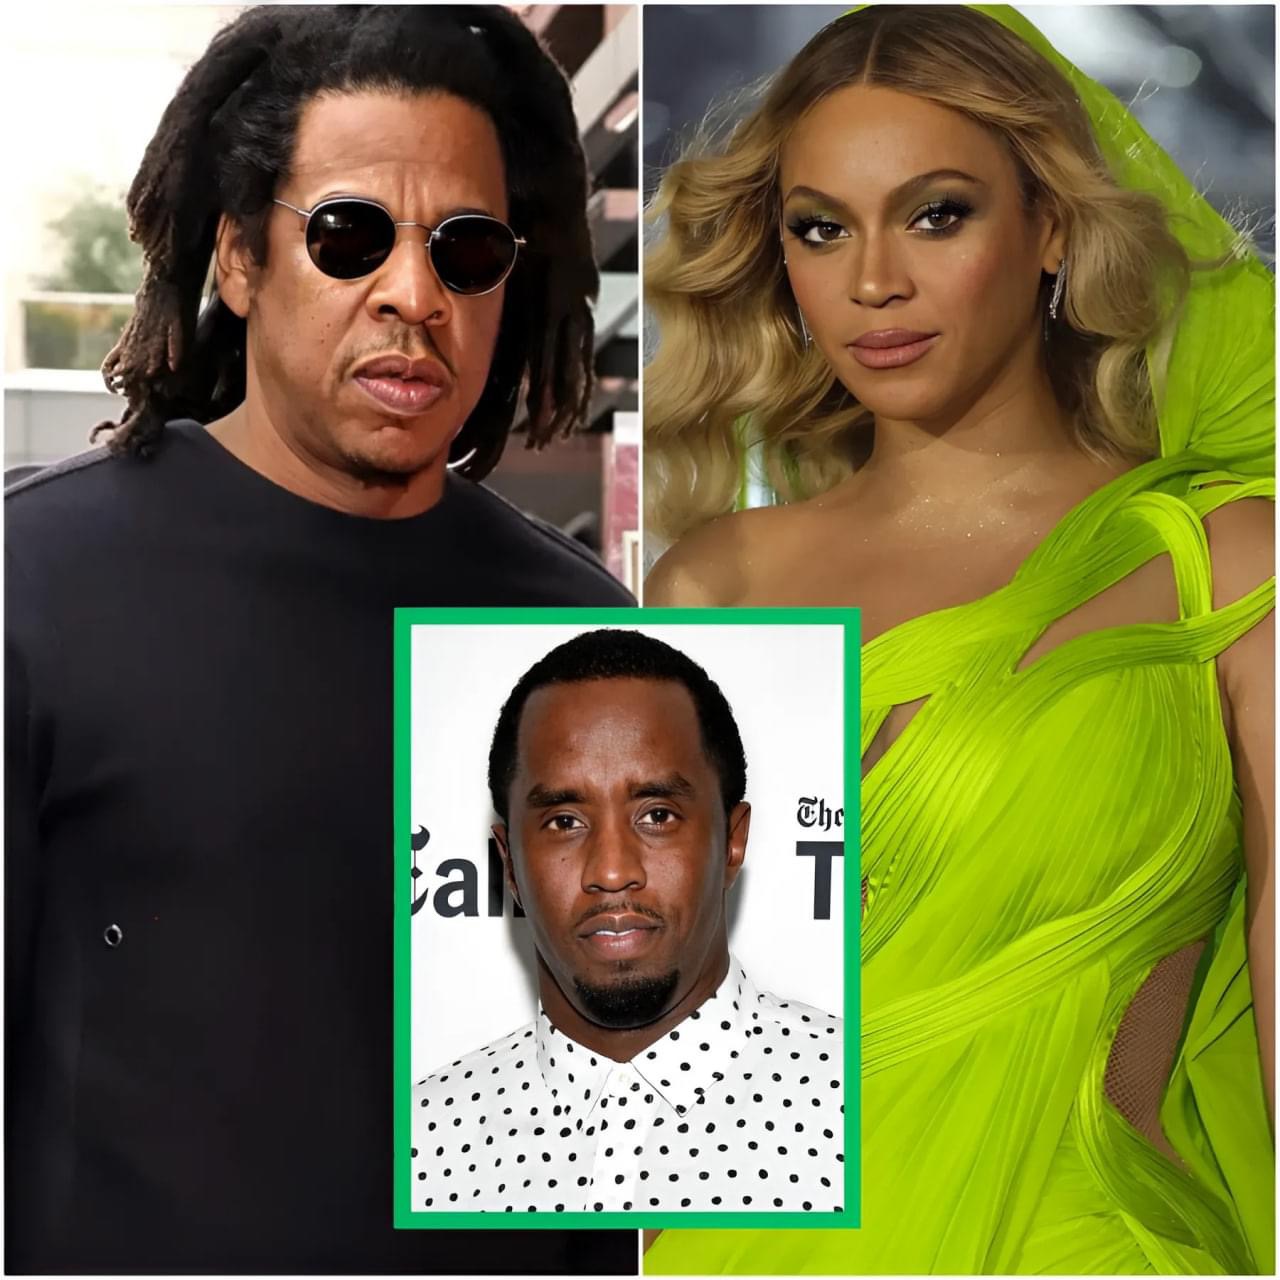 “If I’m going down, I’m taking everybody with me” – ‘This makes me think they might have allegedly took out DMX too’: Jay Z PANICS After Diddy THREATENS To Expose Him, Beyonce Complicit?.